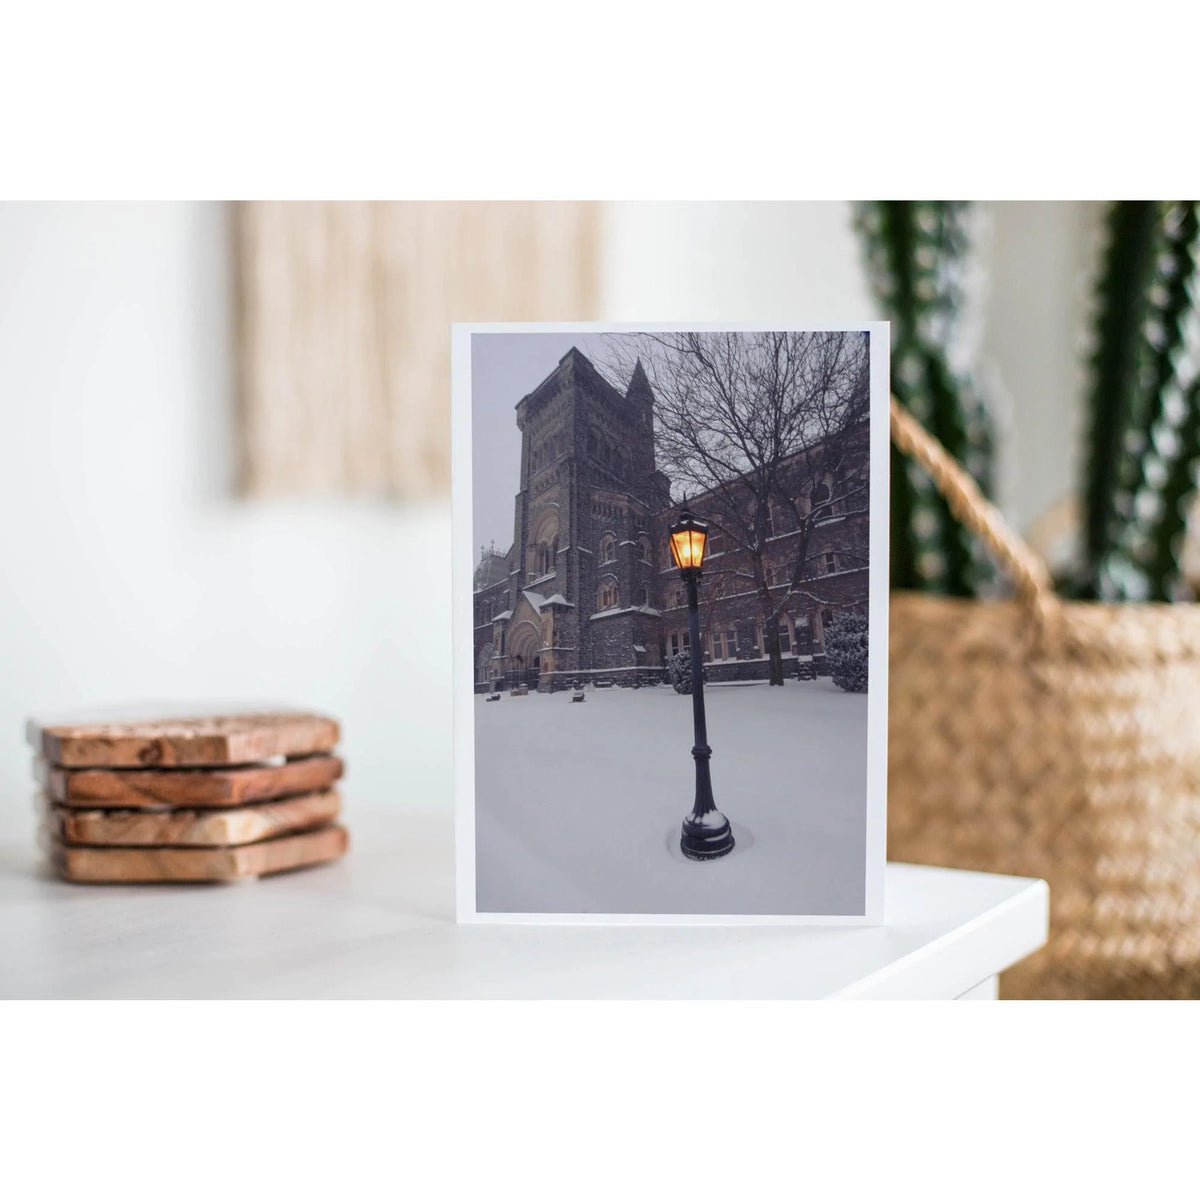 U of T - St George Campus Snowstorm Greeting Card | Totally Toronto Art Inc. 